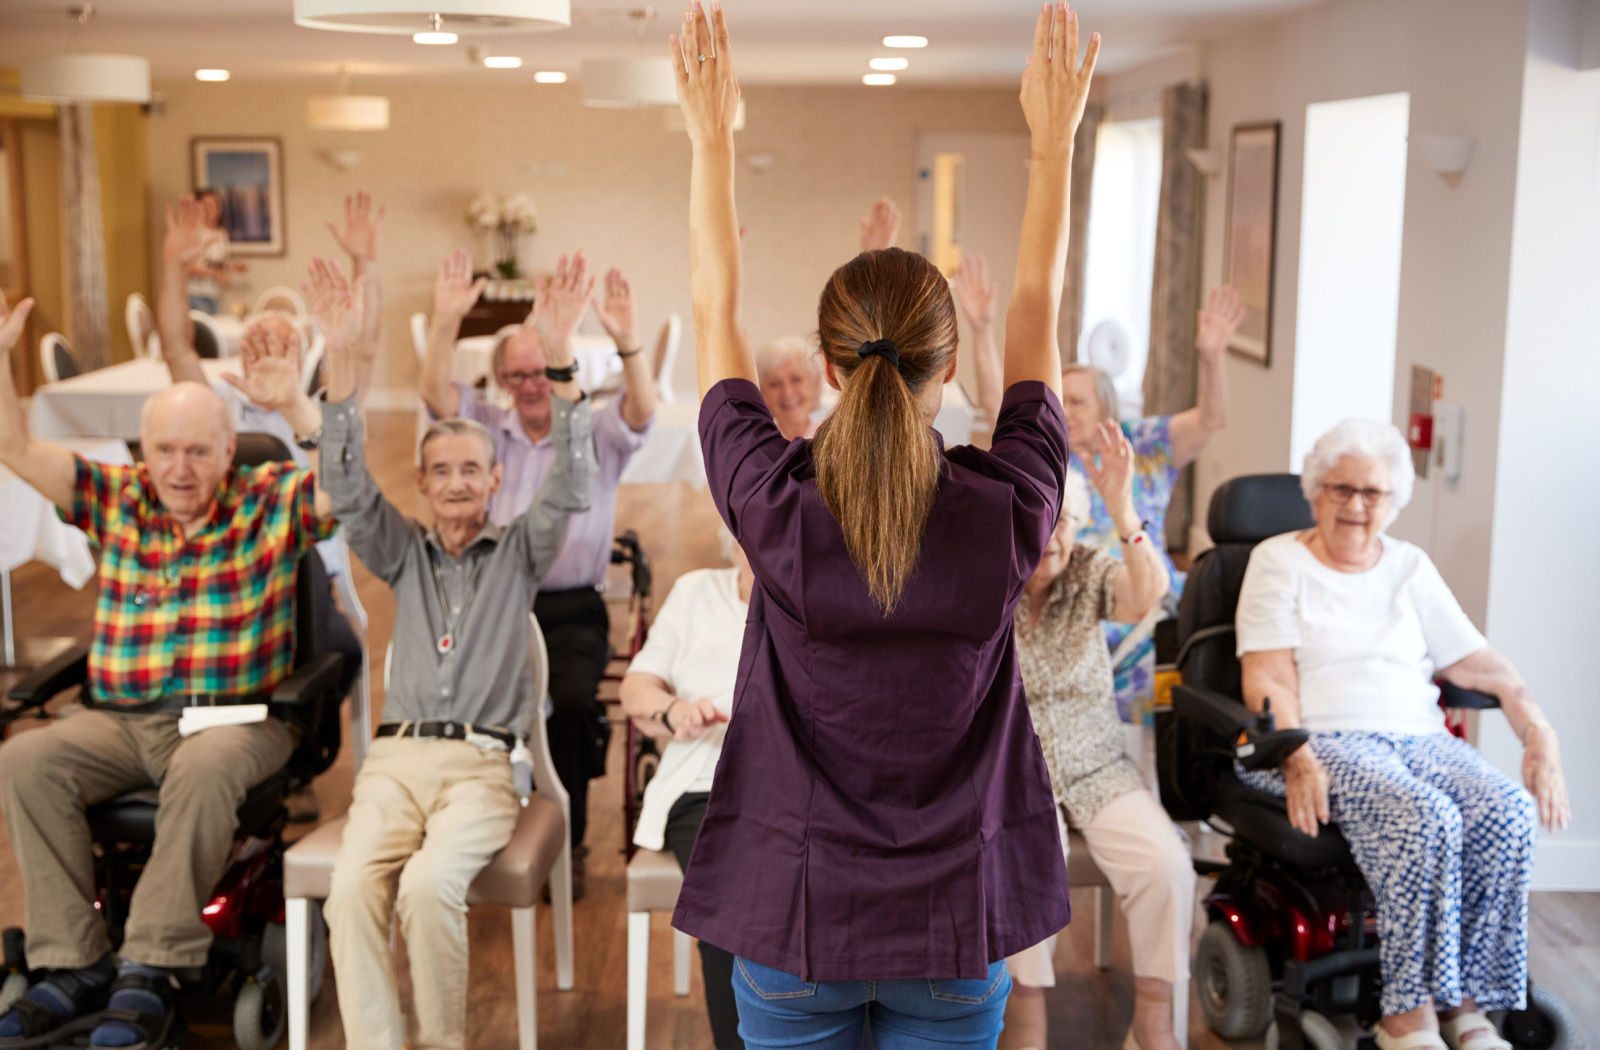 A group of seniors in an audience, each raising their right hand in a fist, some are smiling, as a nurse stands and leads the exercise